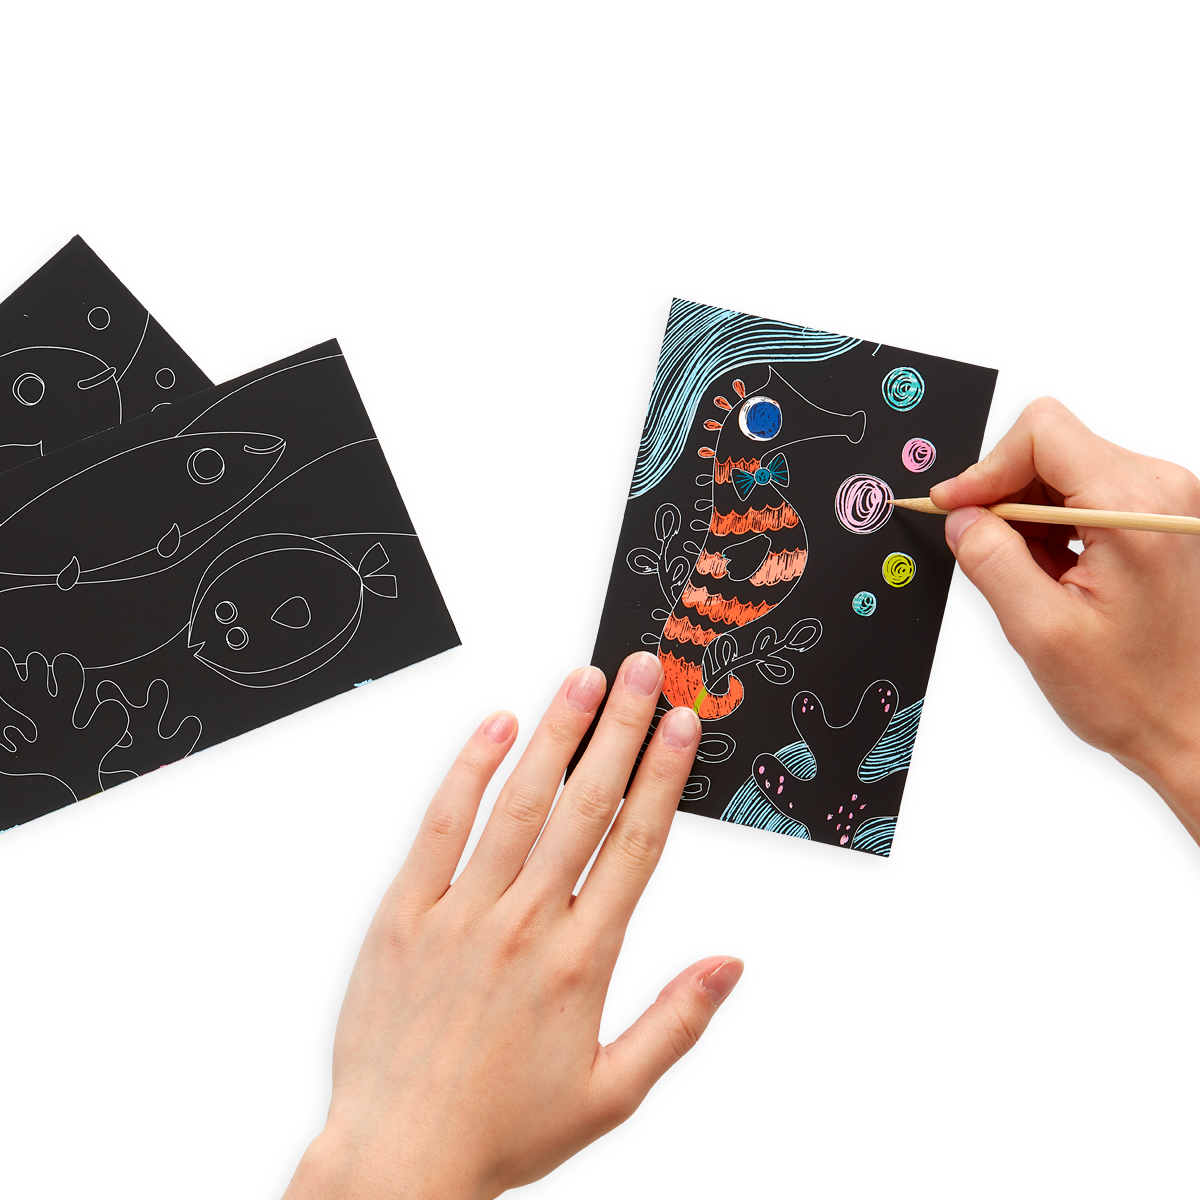 hands drawing on Friendly Fish Scratch and Scribble Mini Scratch Art Kit